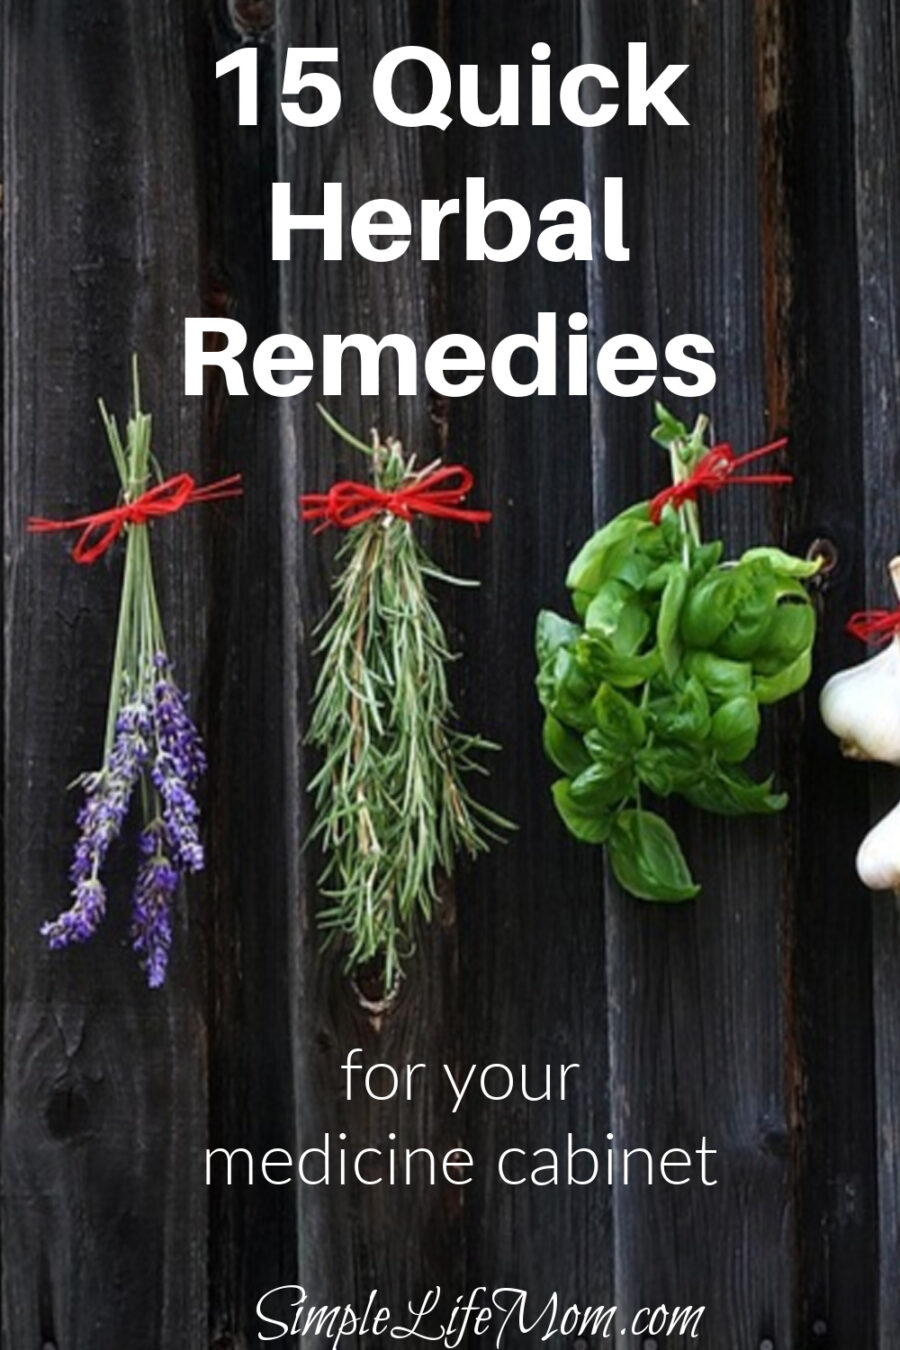 15-Quick-Herbal-Remedies-for-Your-Medicine-Cabinet-by-Simple-Life-Mom